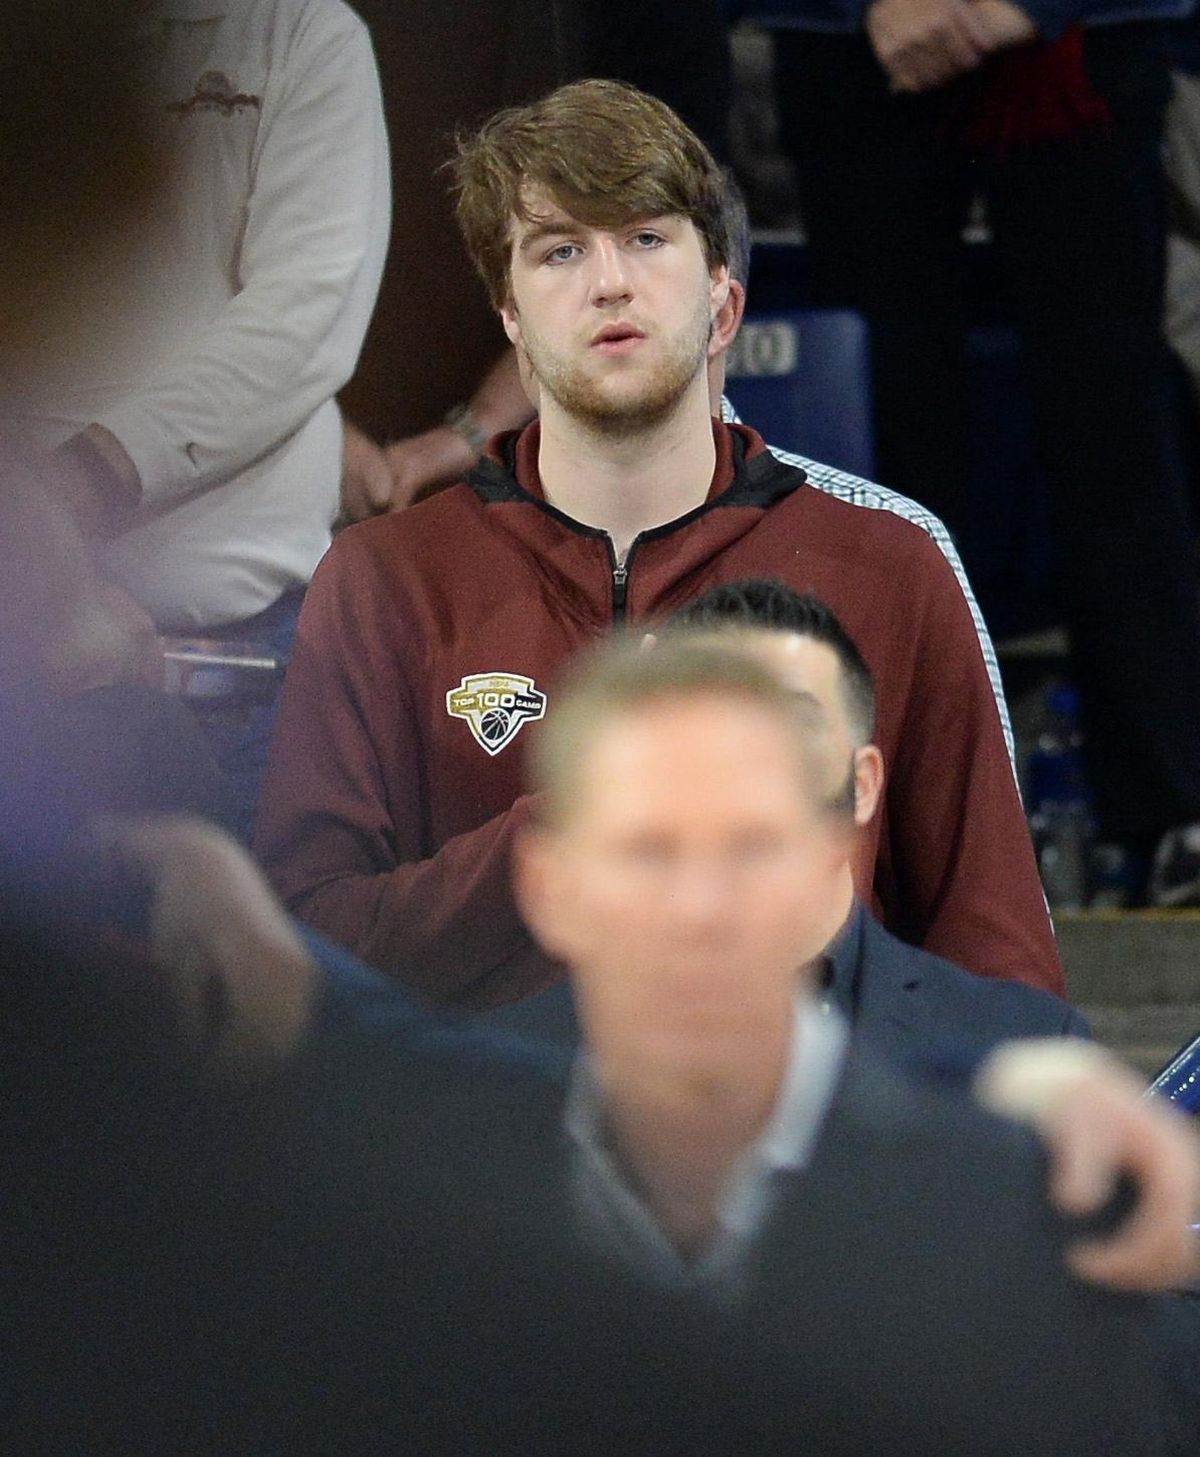 Gonzaga recruit Drew Timme watches from behind the Bulldogs’ bench during Wednesday’s 81-79 home victory over Washington  at the McCarthey Athletic Center. (Dan Pelle / The Spokesman-Review)